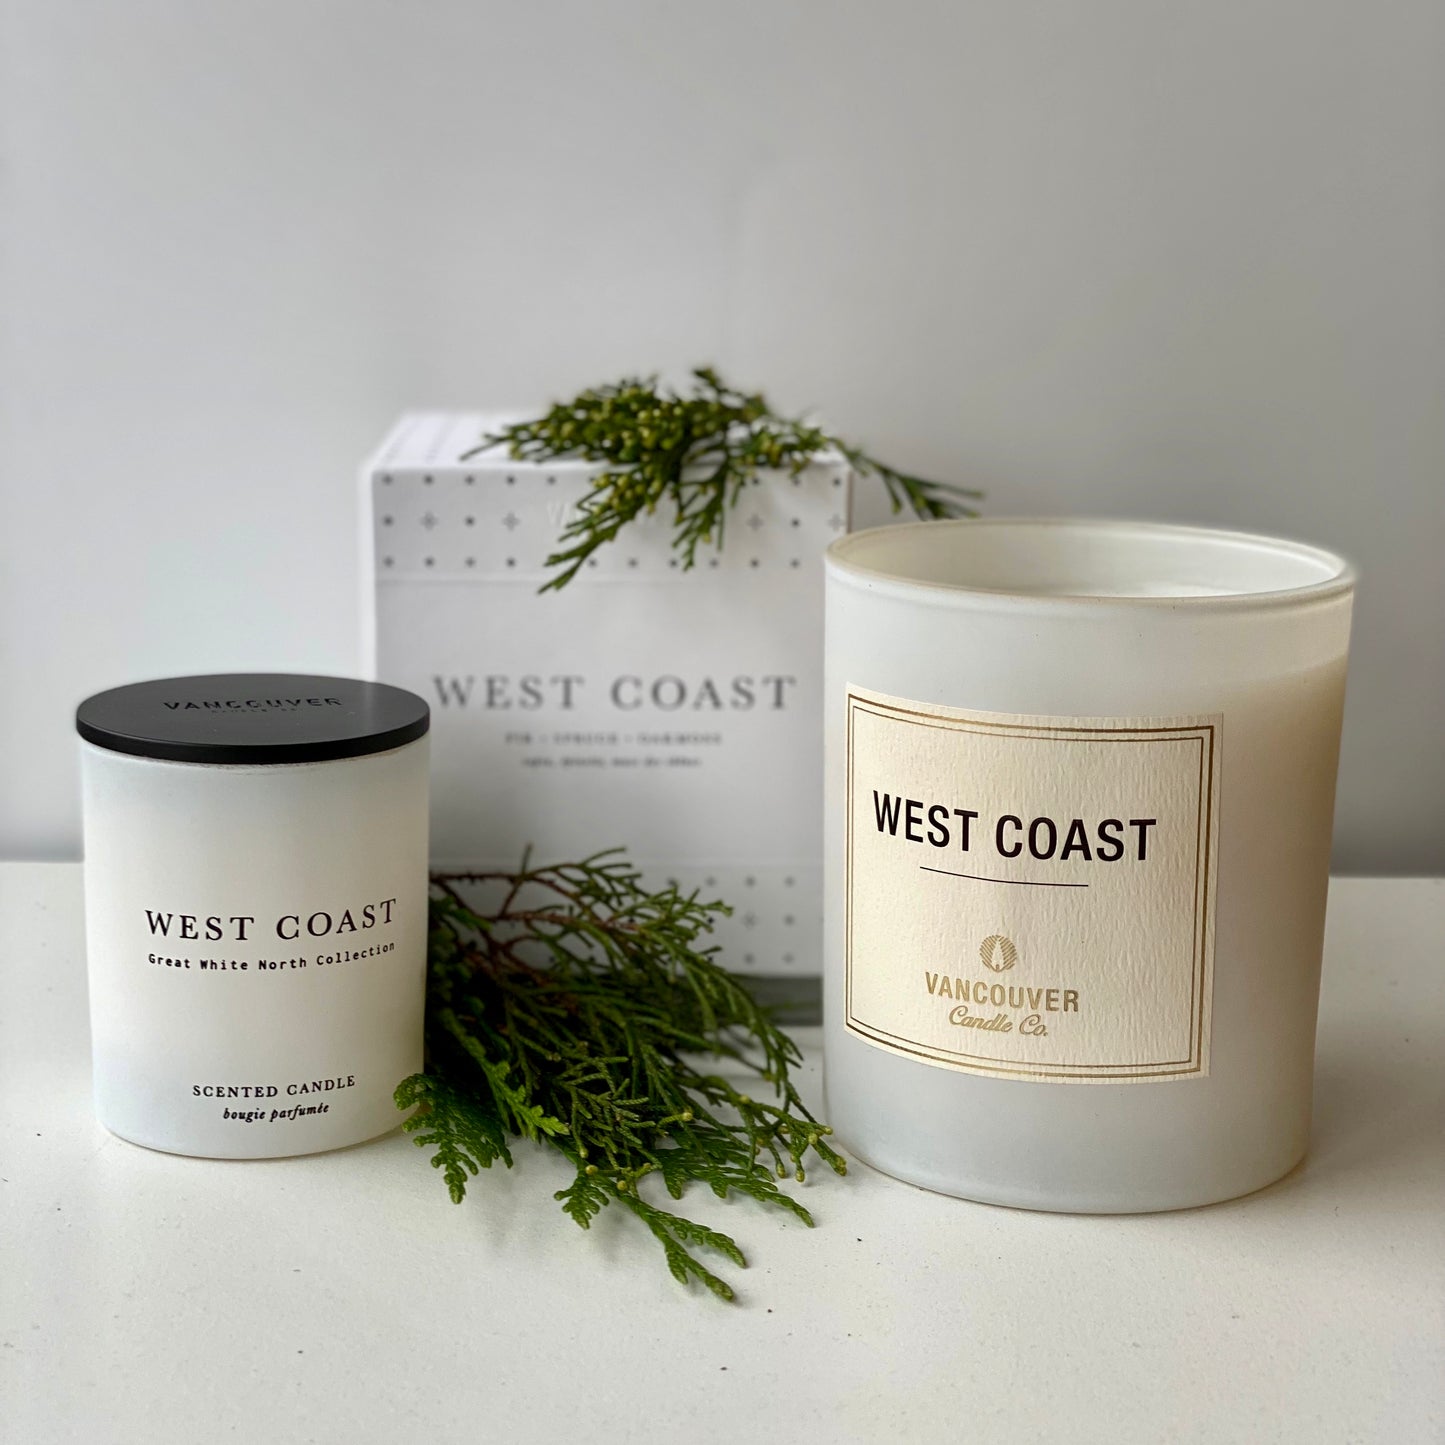 West Coast Candle - Vancouver Candle Co